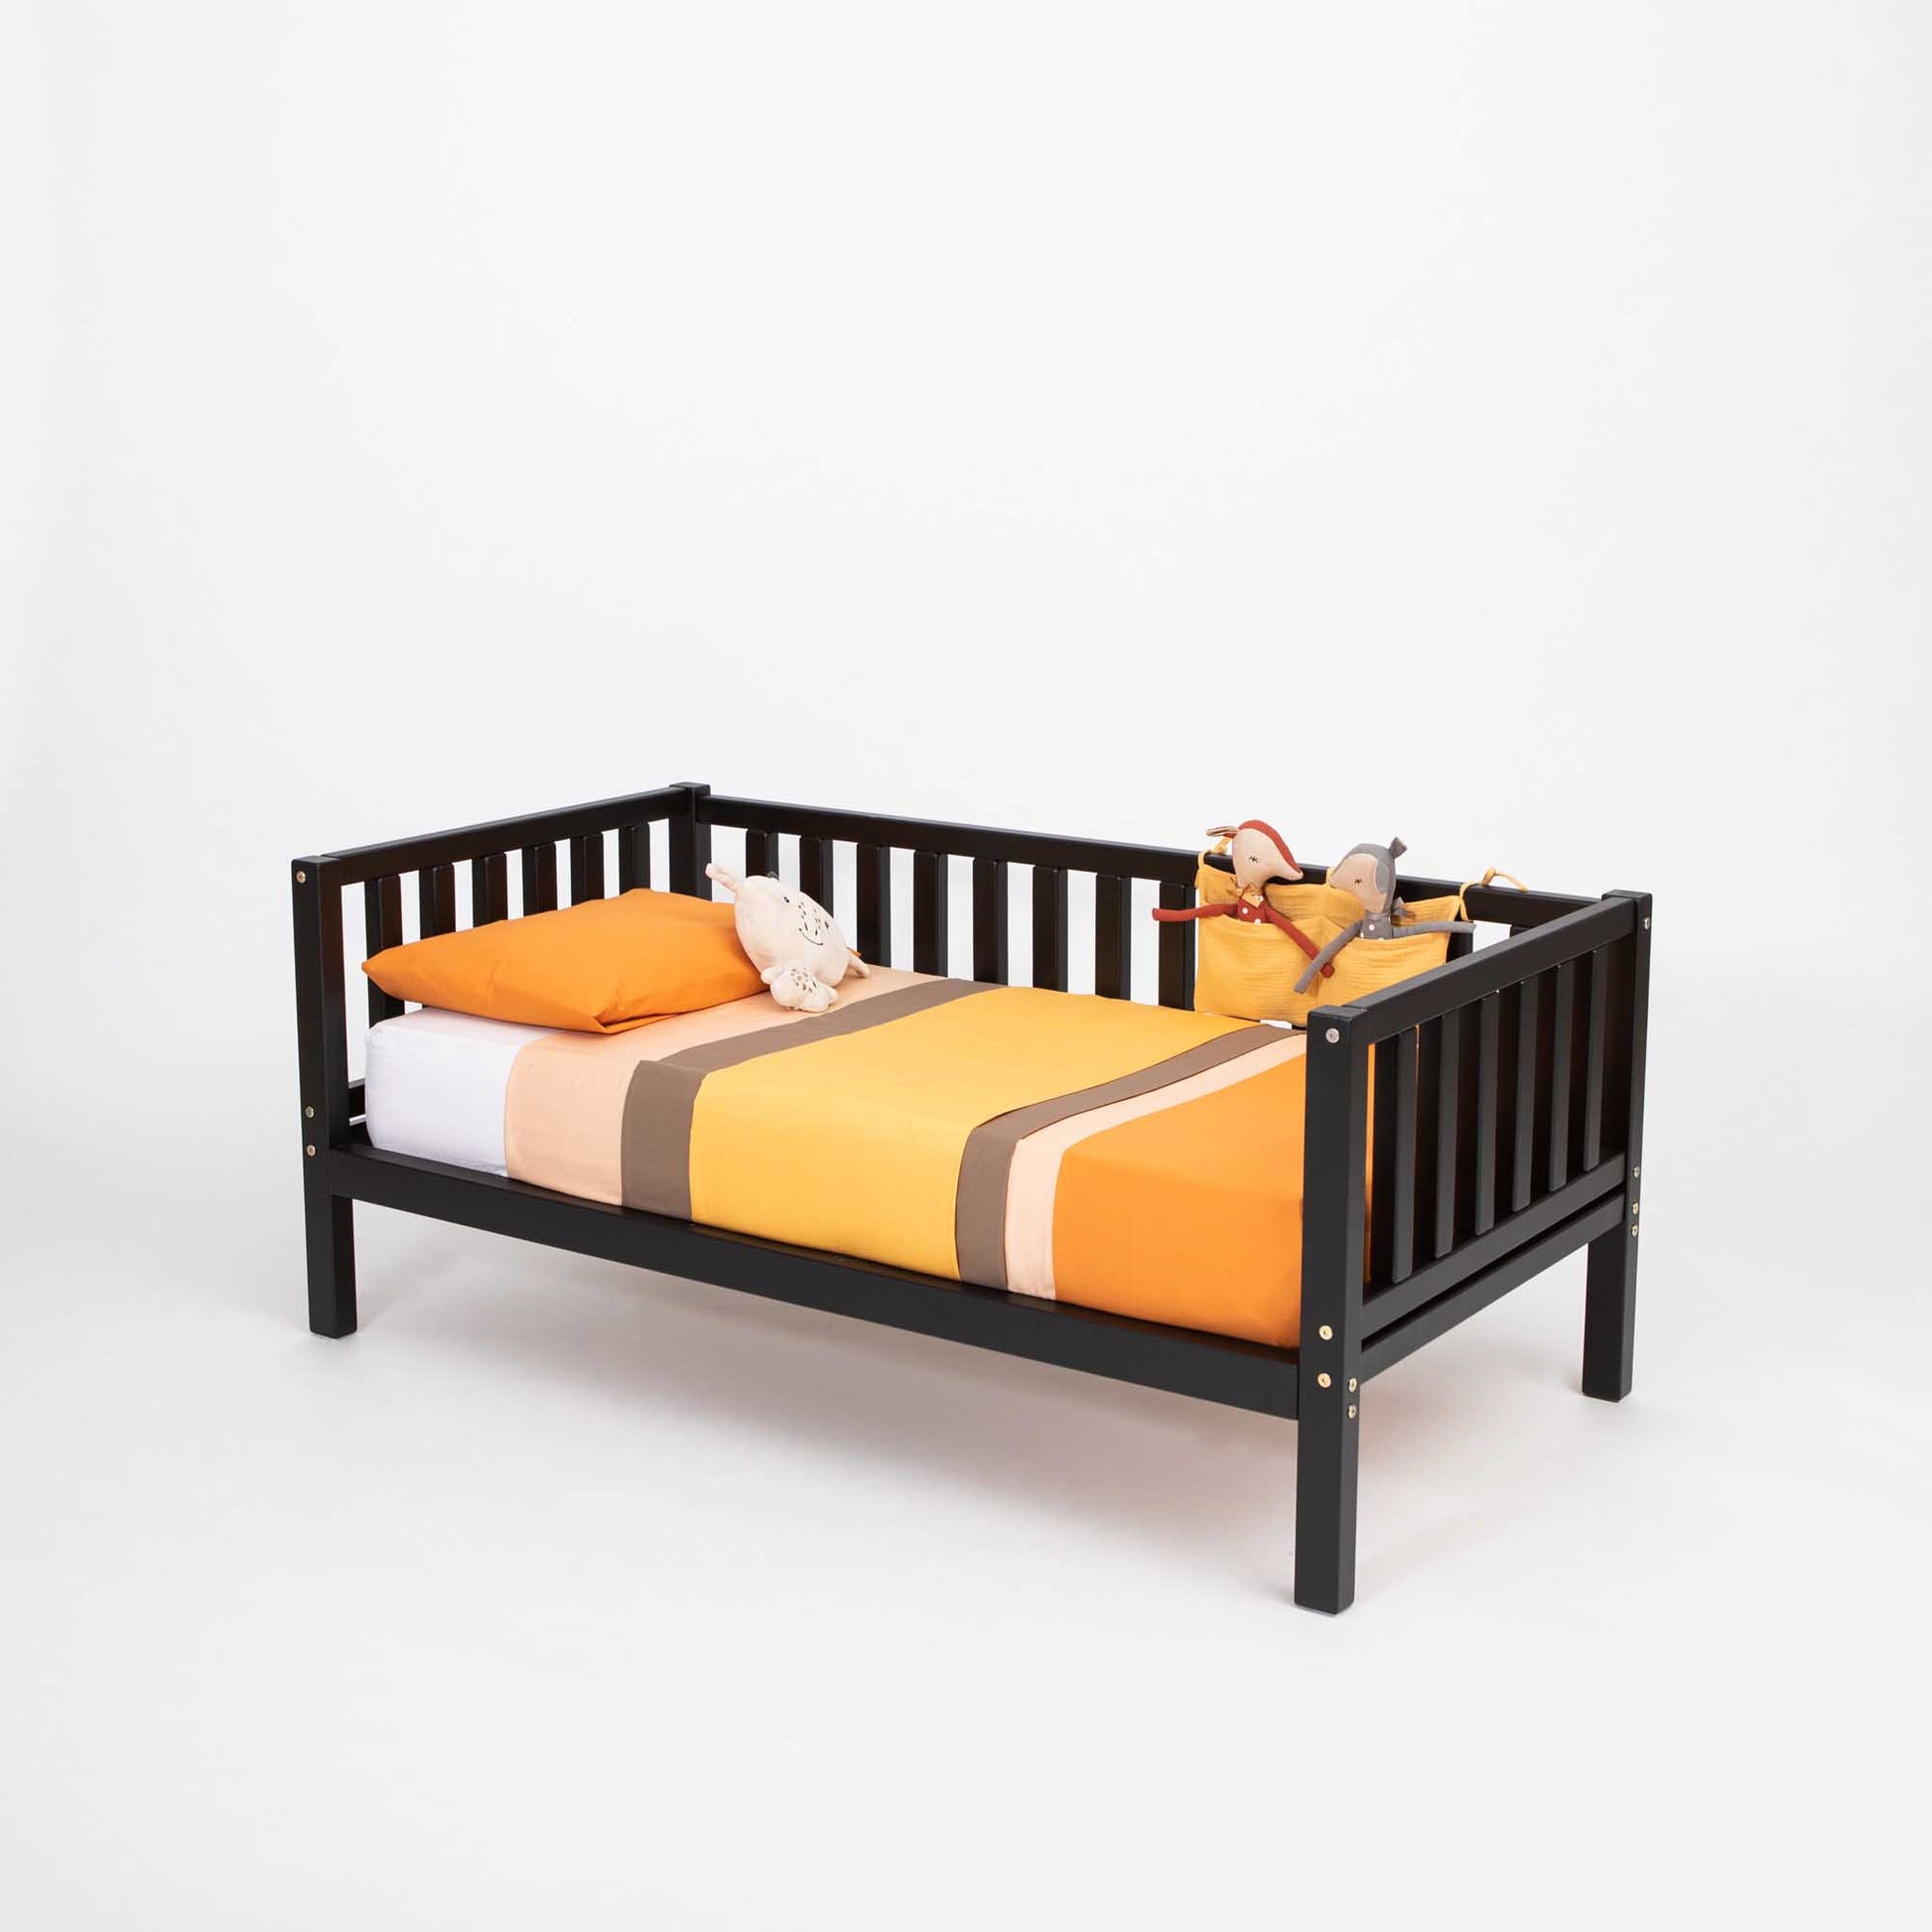 A Kids' platform bed on legs with 3-sided rails, inspired by Montessori and made by Sweet Home From Wood, with an orange and yellow blanket.